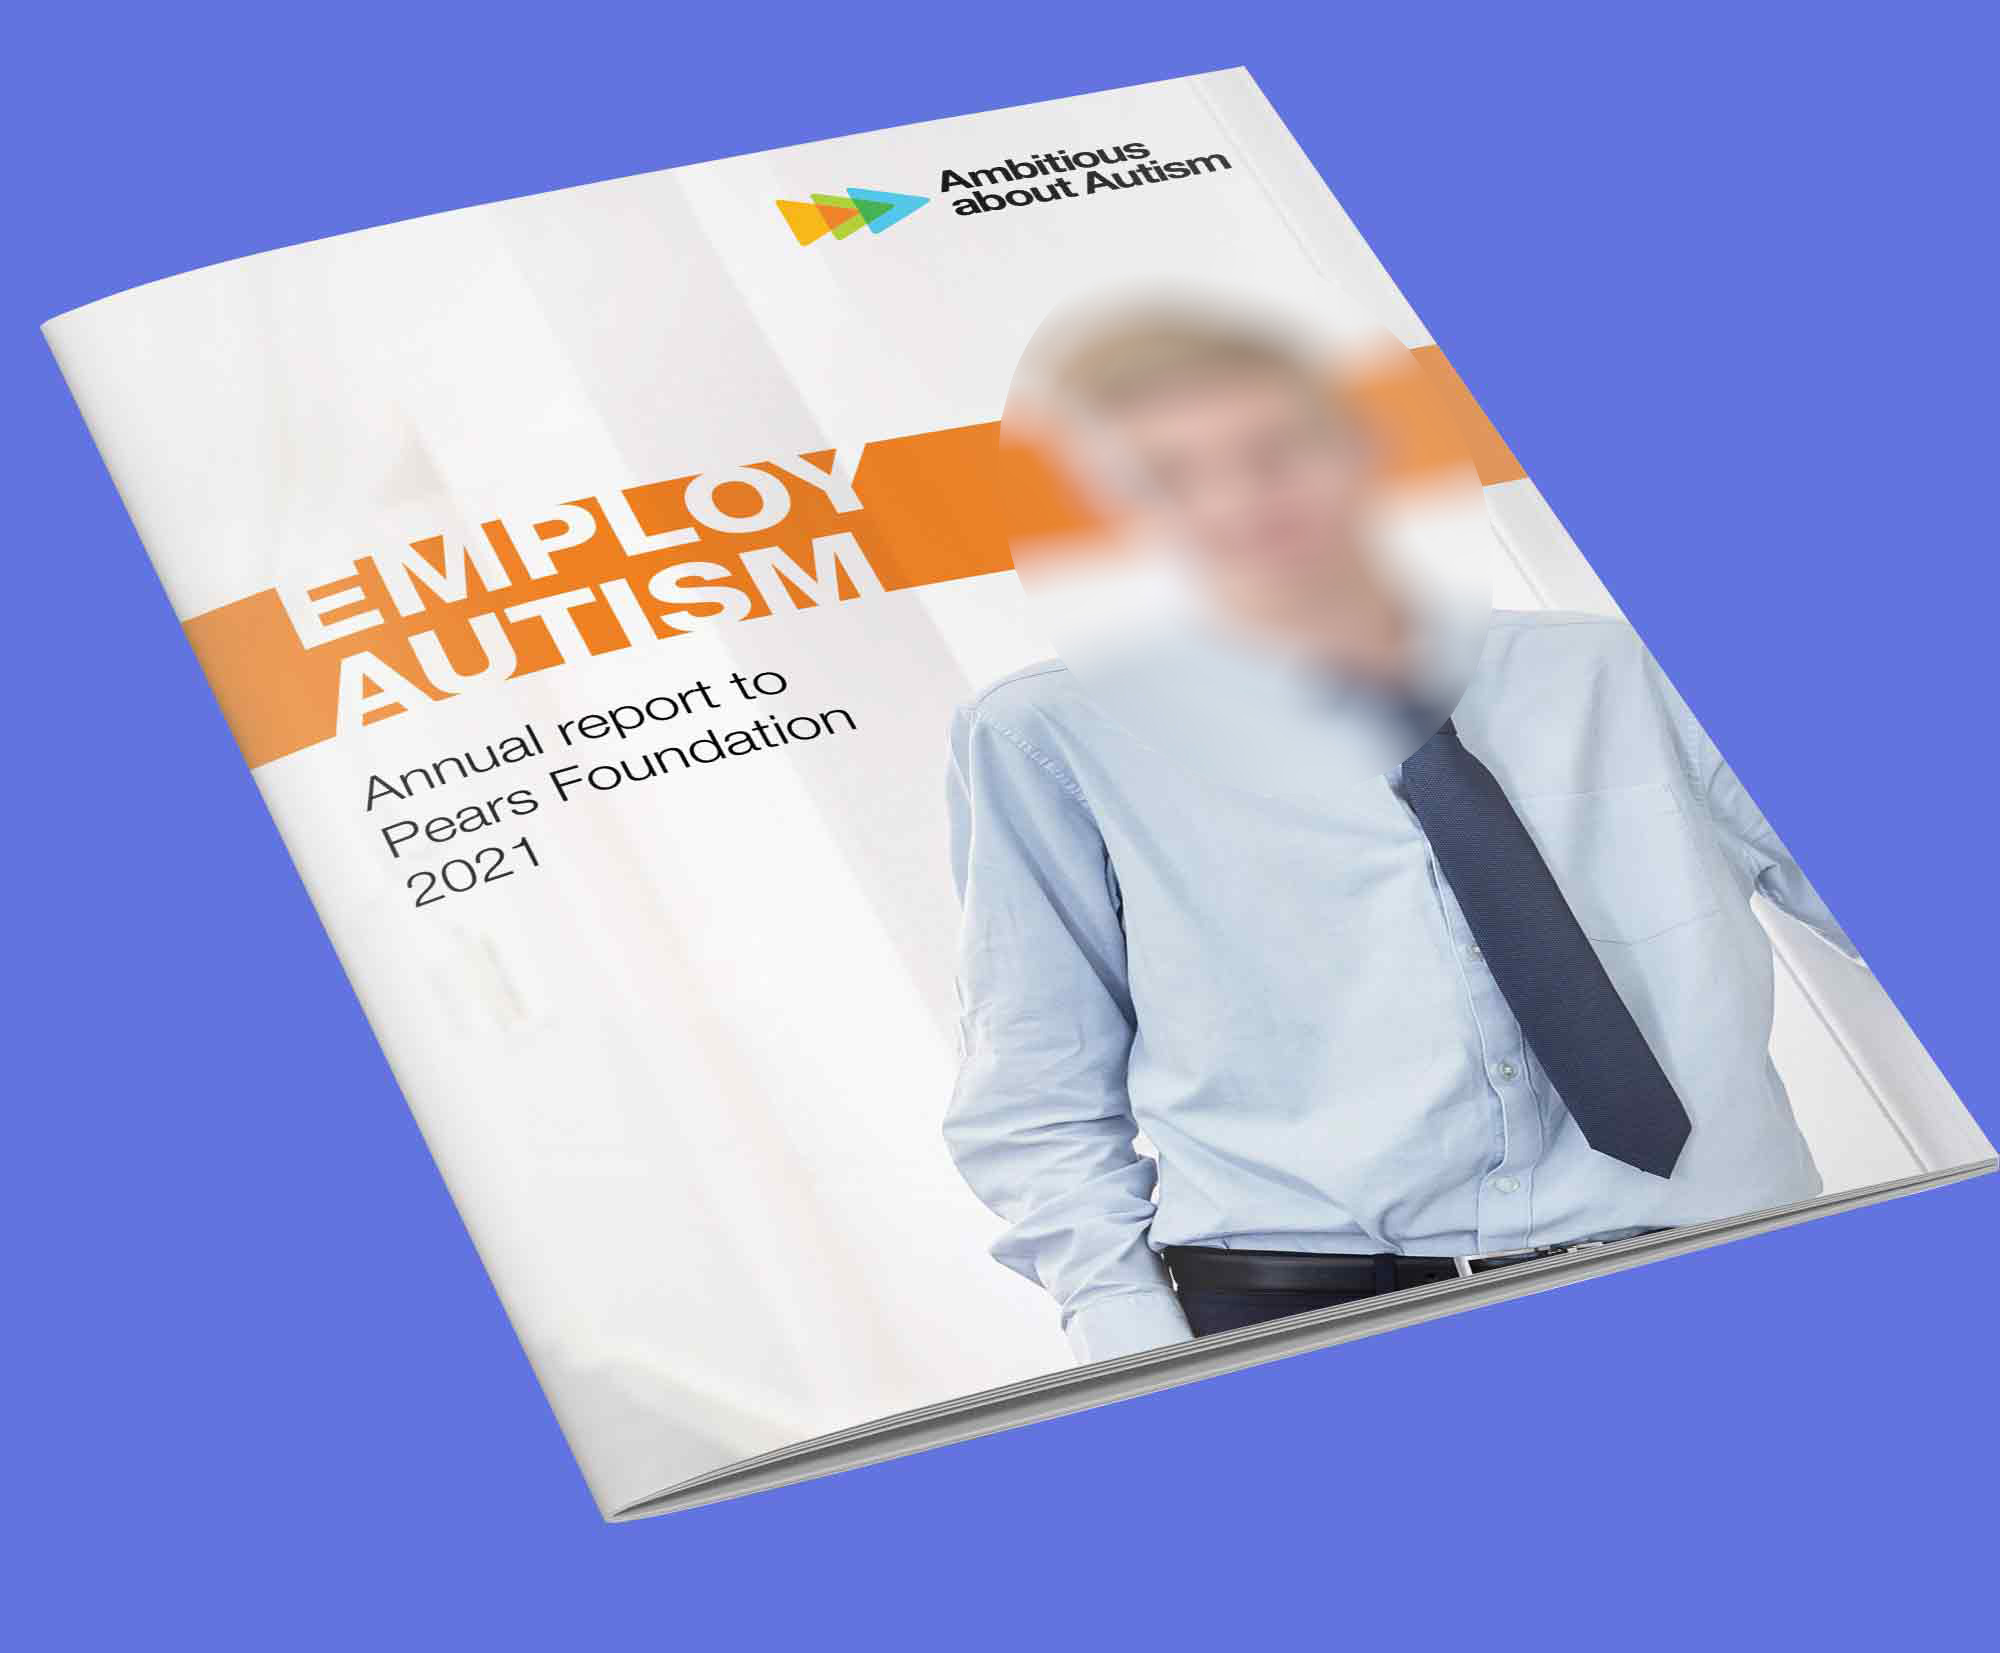 Ambitions about autism employ autism annual report